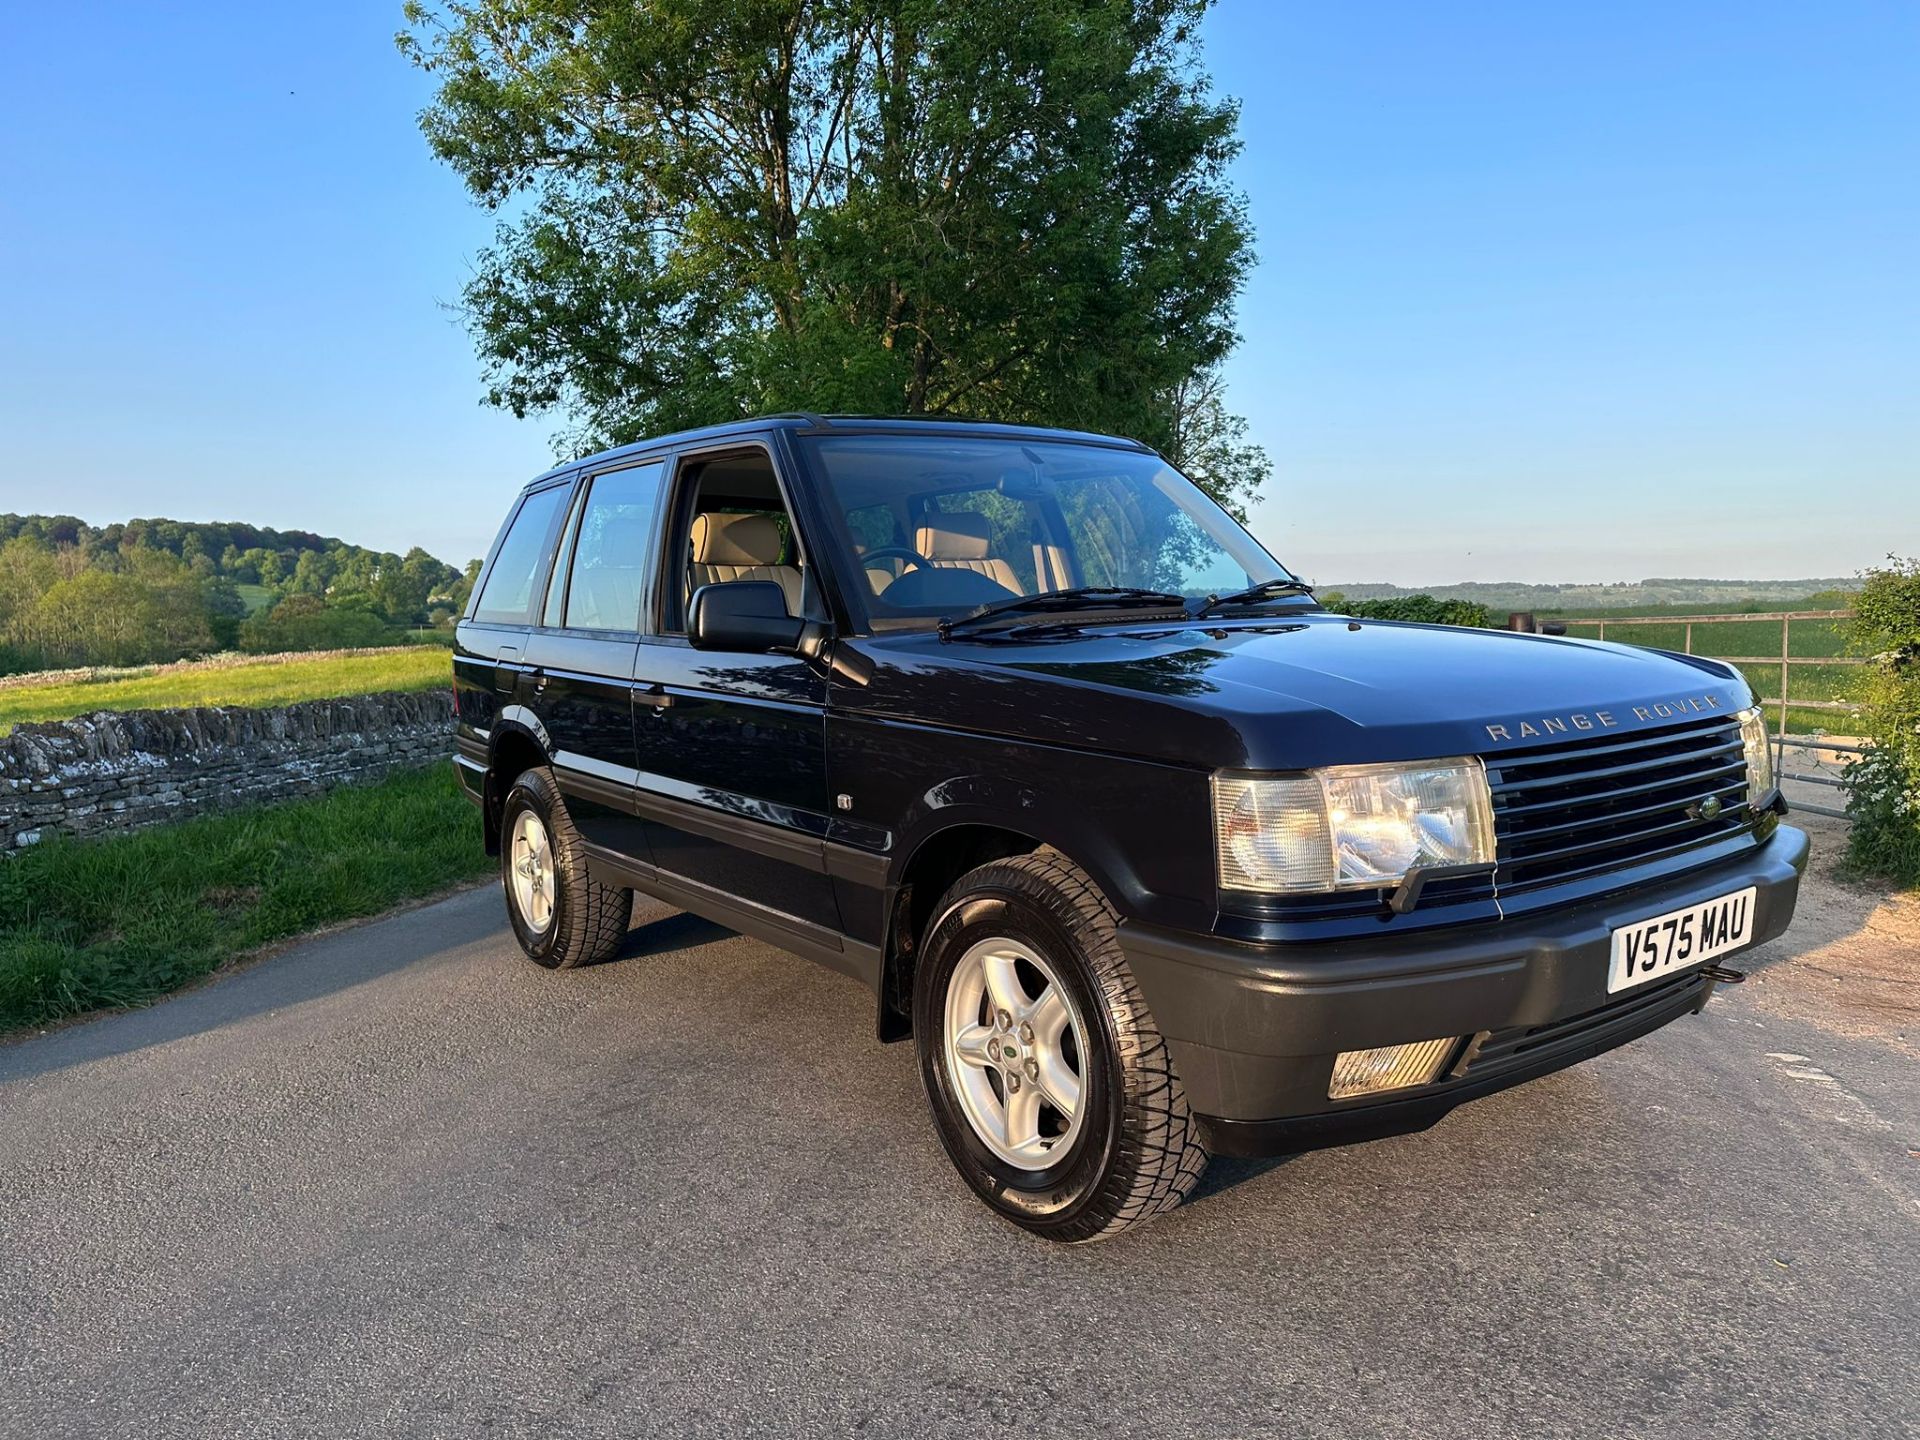 1999 RANGE ROVER VOGUE 4.6 V8 P38 (THOR ENGINE) - 59K MILES FROM NEW